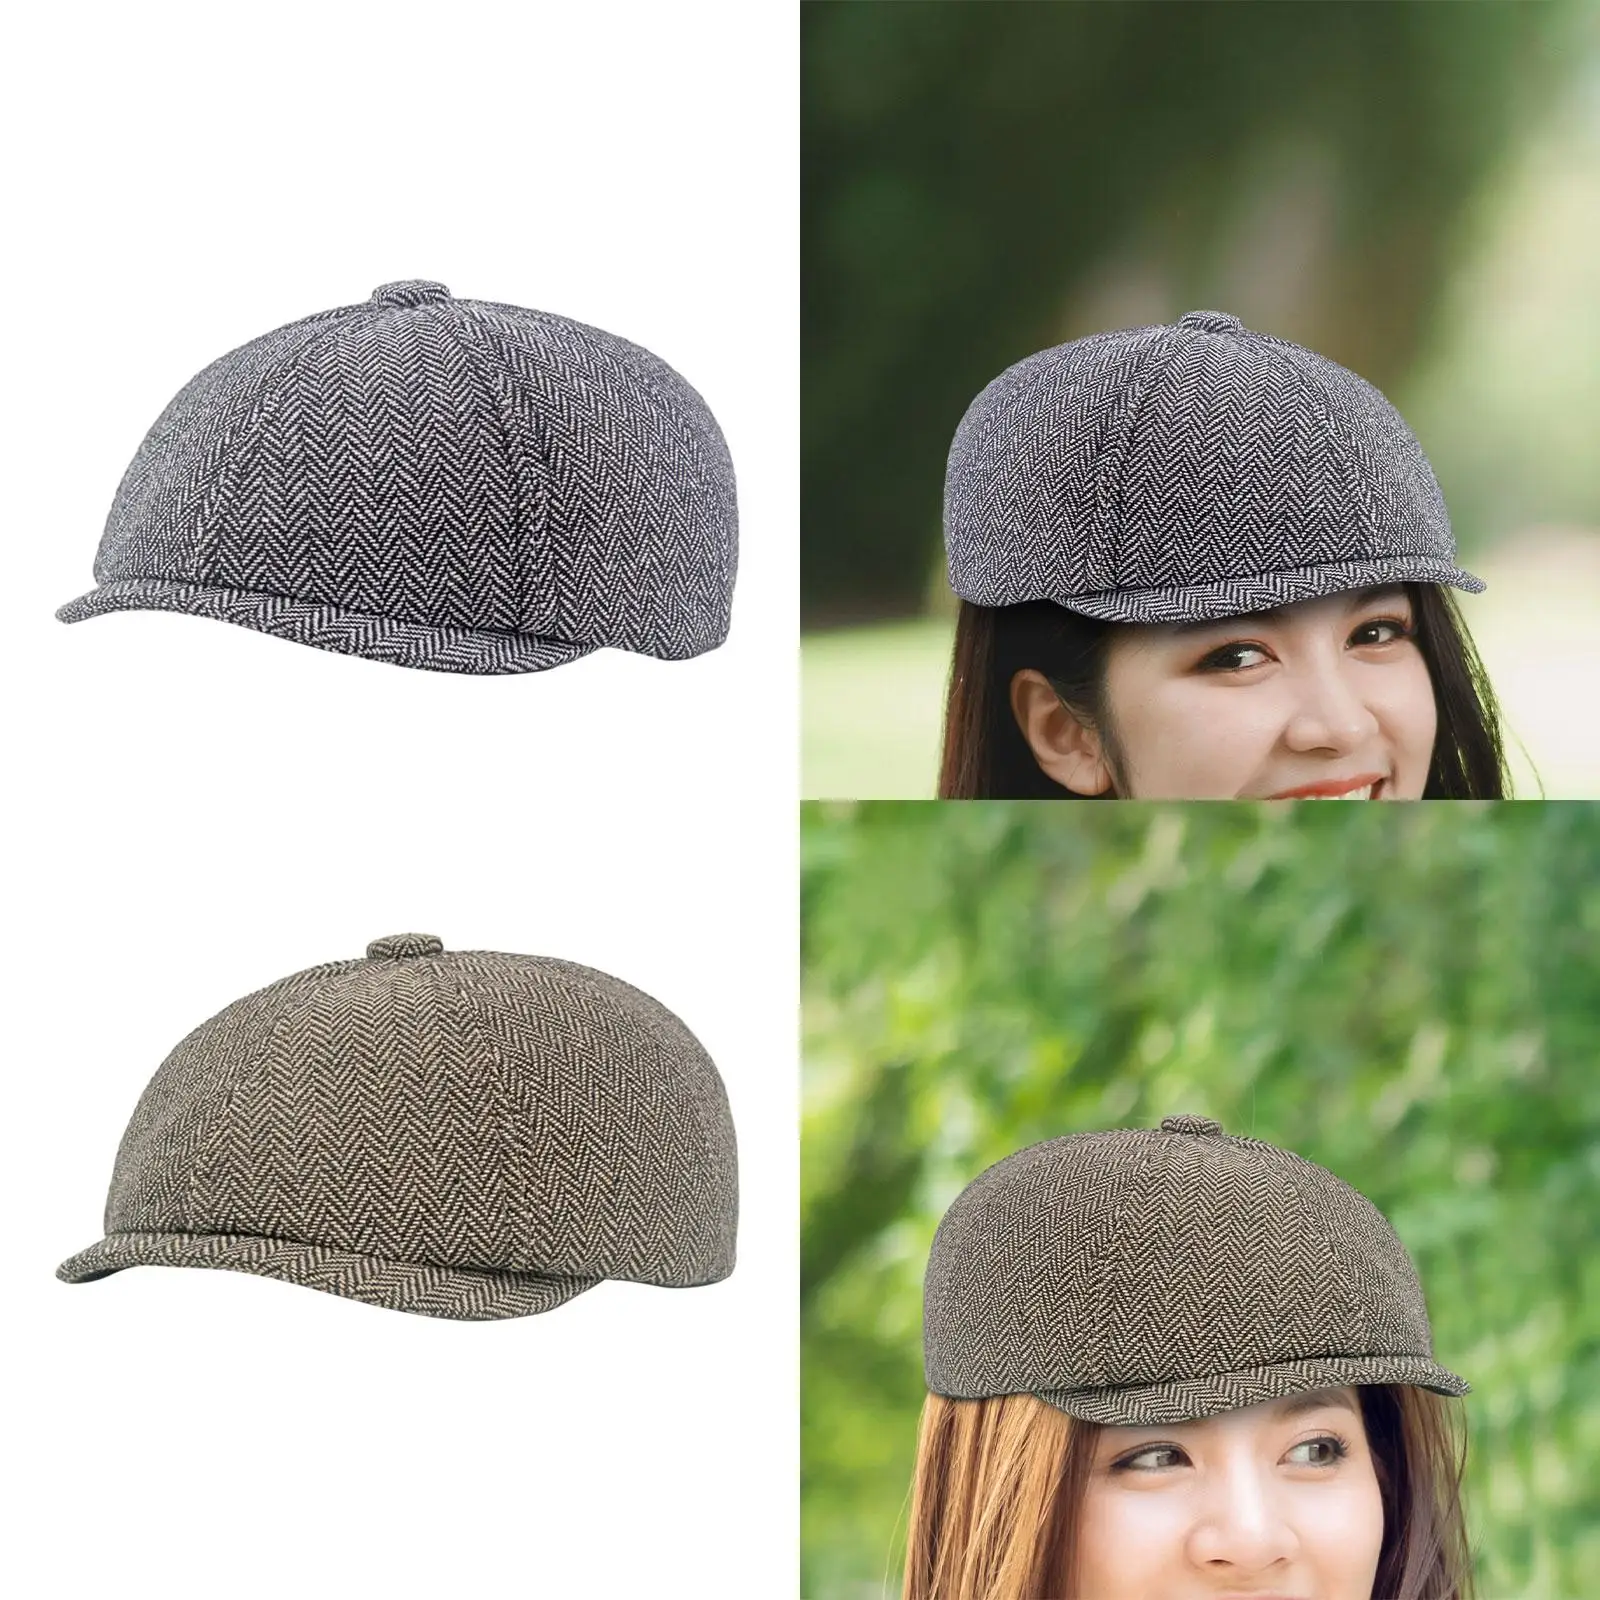 Men Beret Hat Golf Hat Adjustable Classic Autumn Winter Casual Fashion Gift Flat Cap for Camping Travel Driving Hiking Outdoor